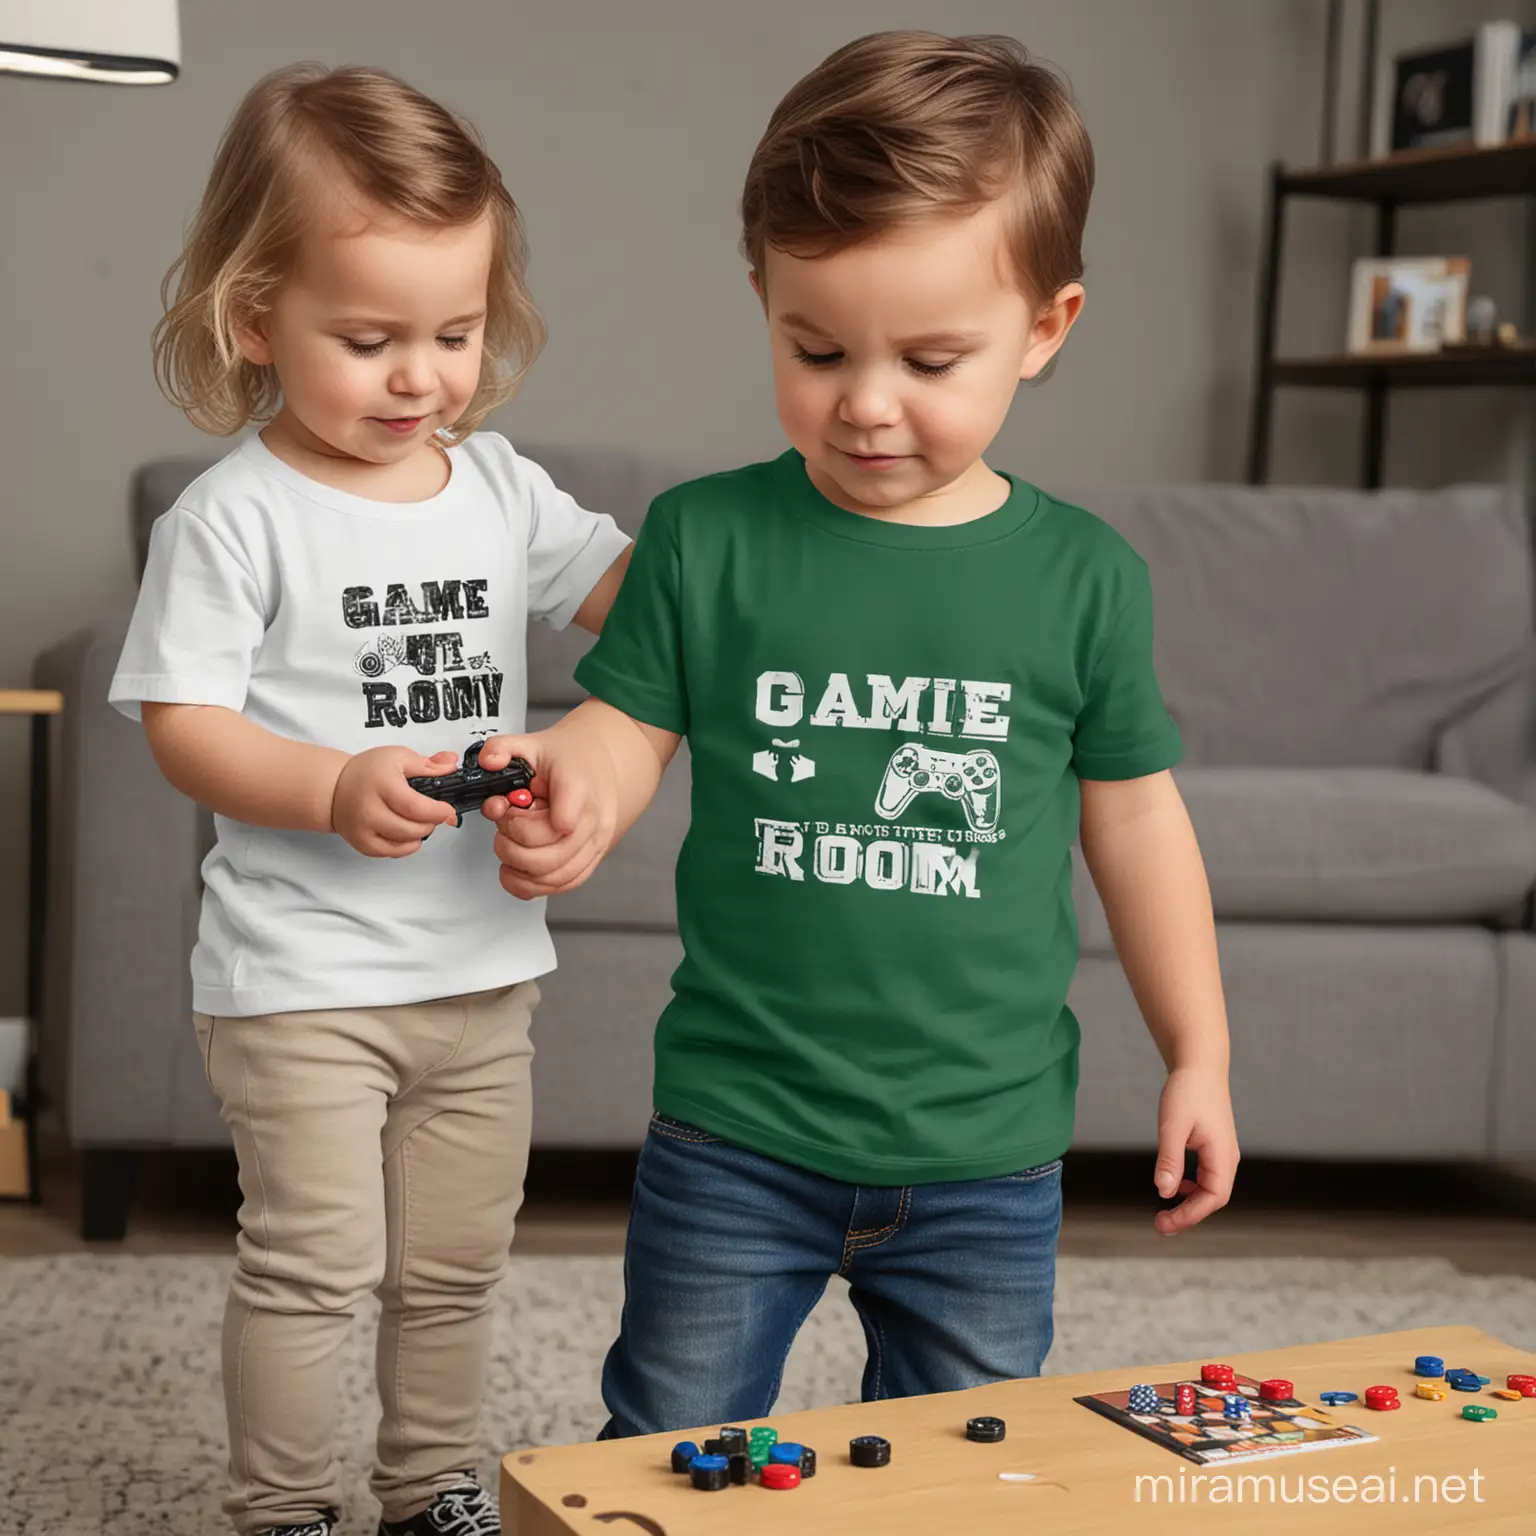 Toddlers Playing Games in ClassicFit TShirts at Game Room